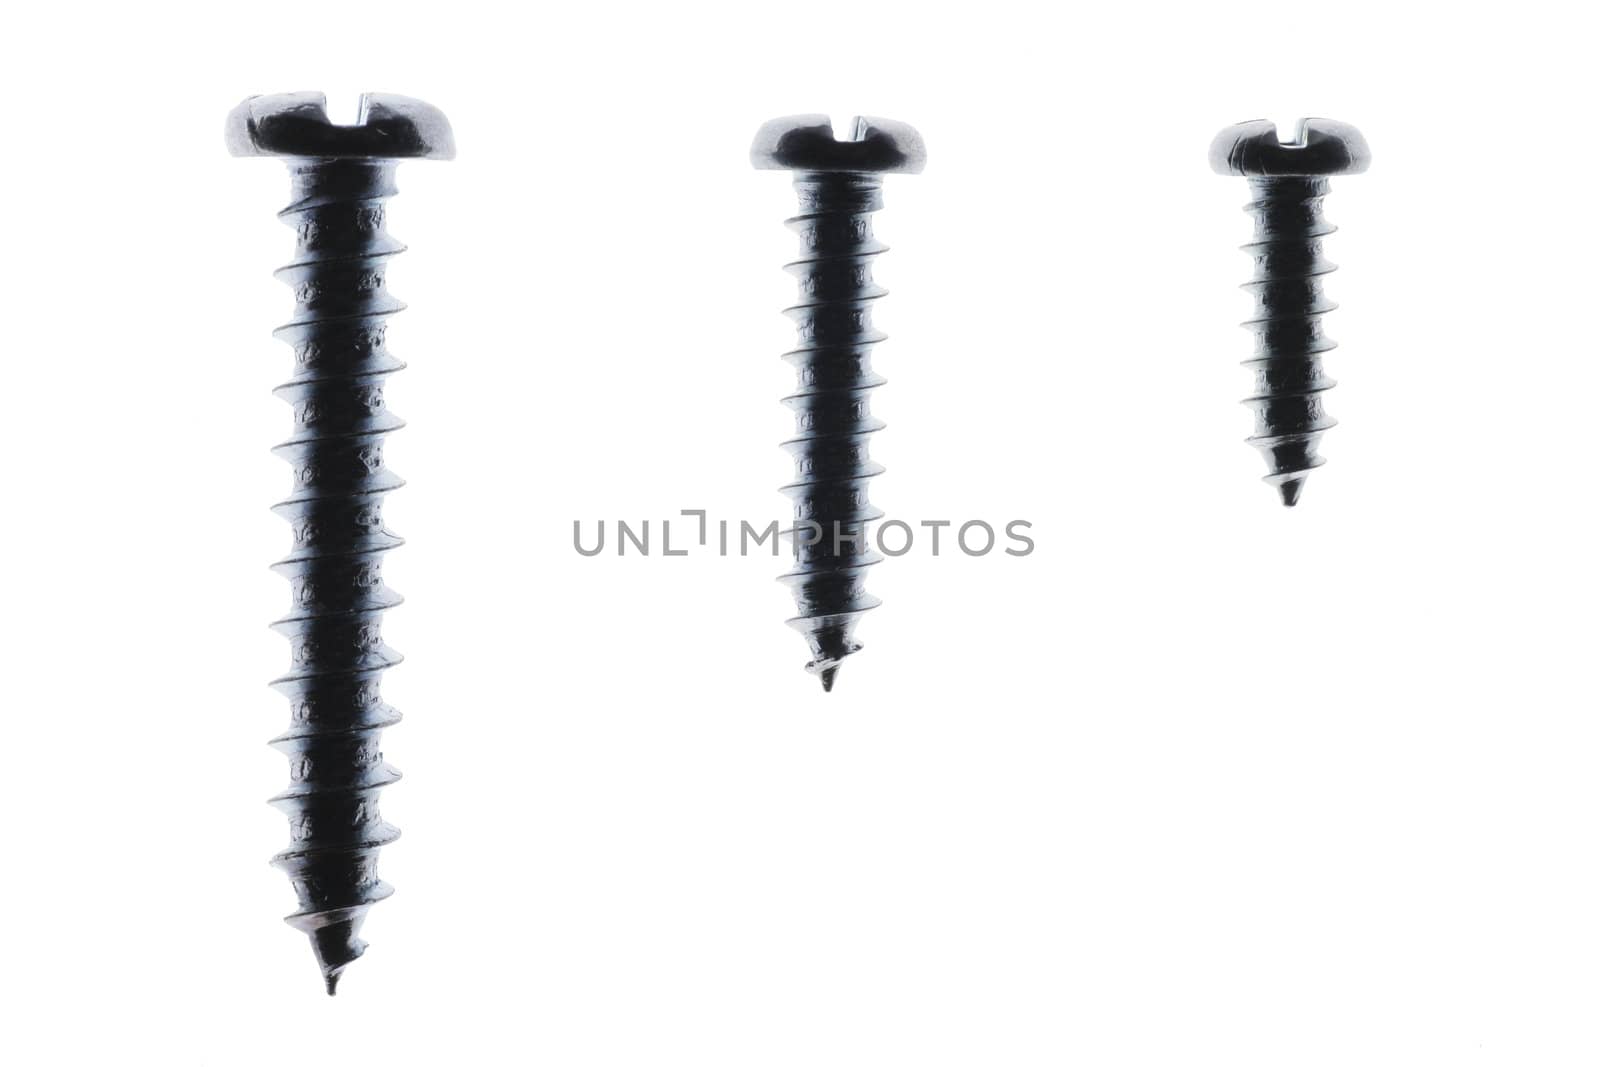 Macro Close-Up Of Three Spiral Metal Screws On A White Background